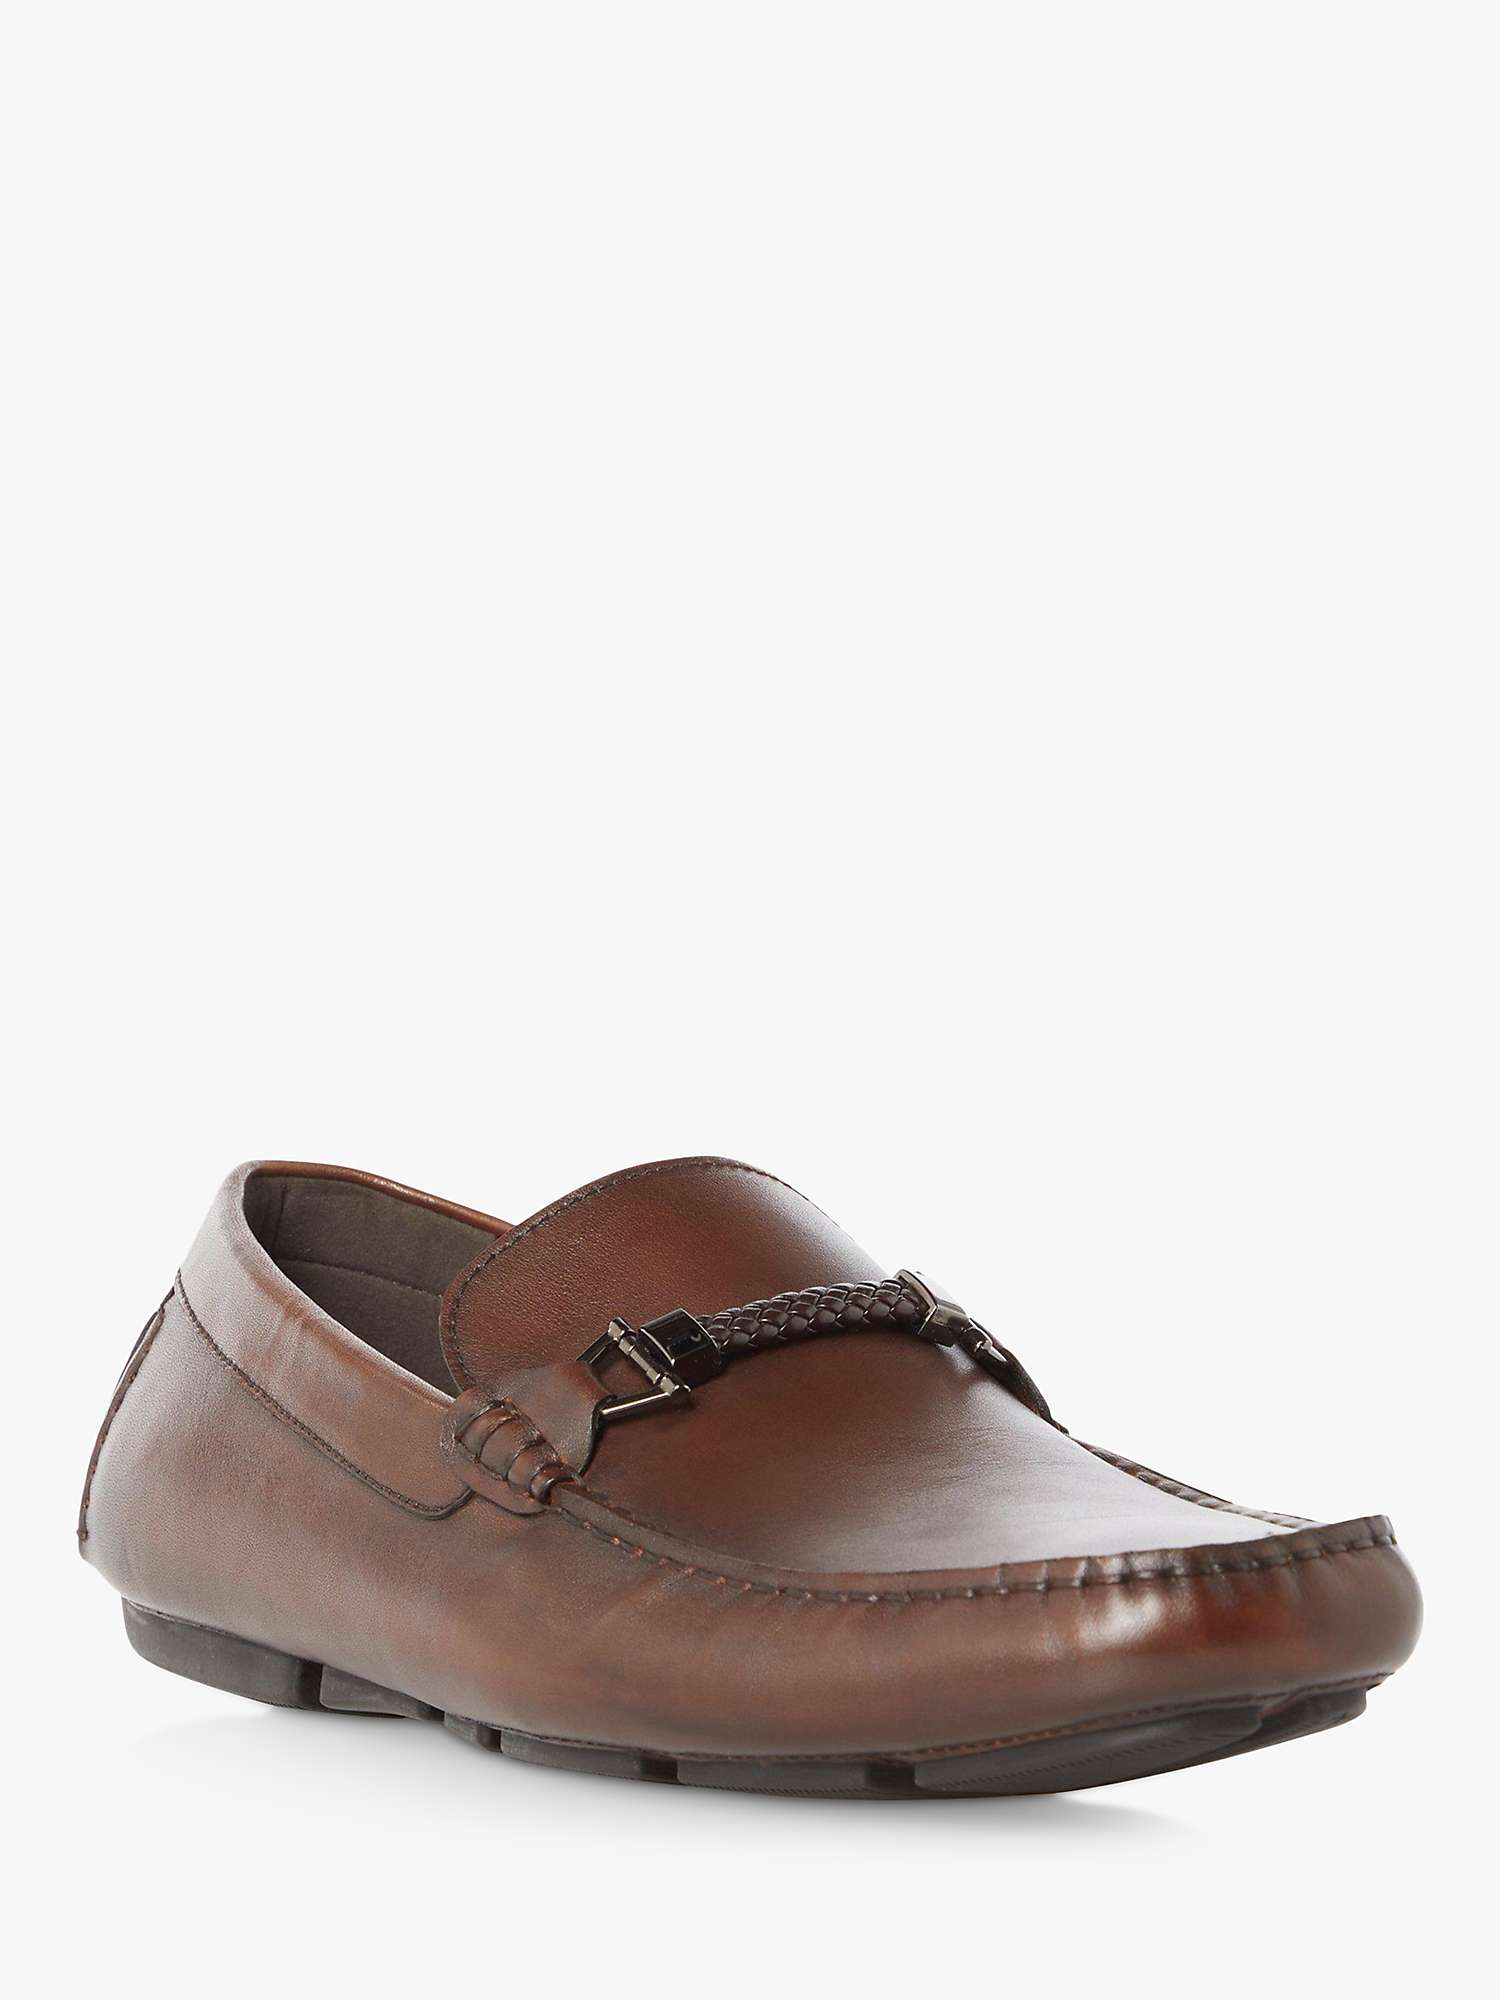 Buy Dune Wide Fit Woven Trim Driver Beacons Loafers Online at johnlewis.com